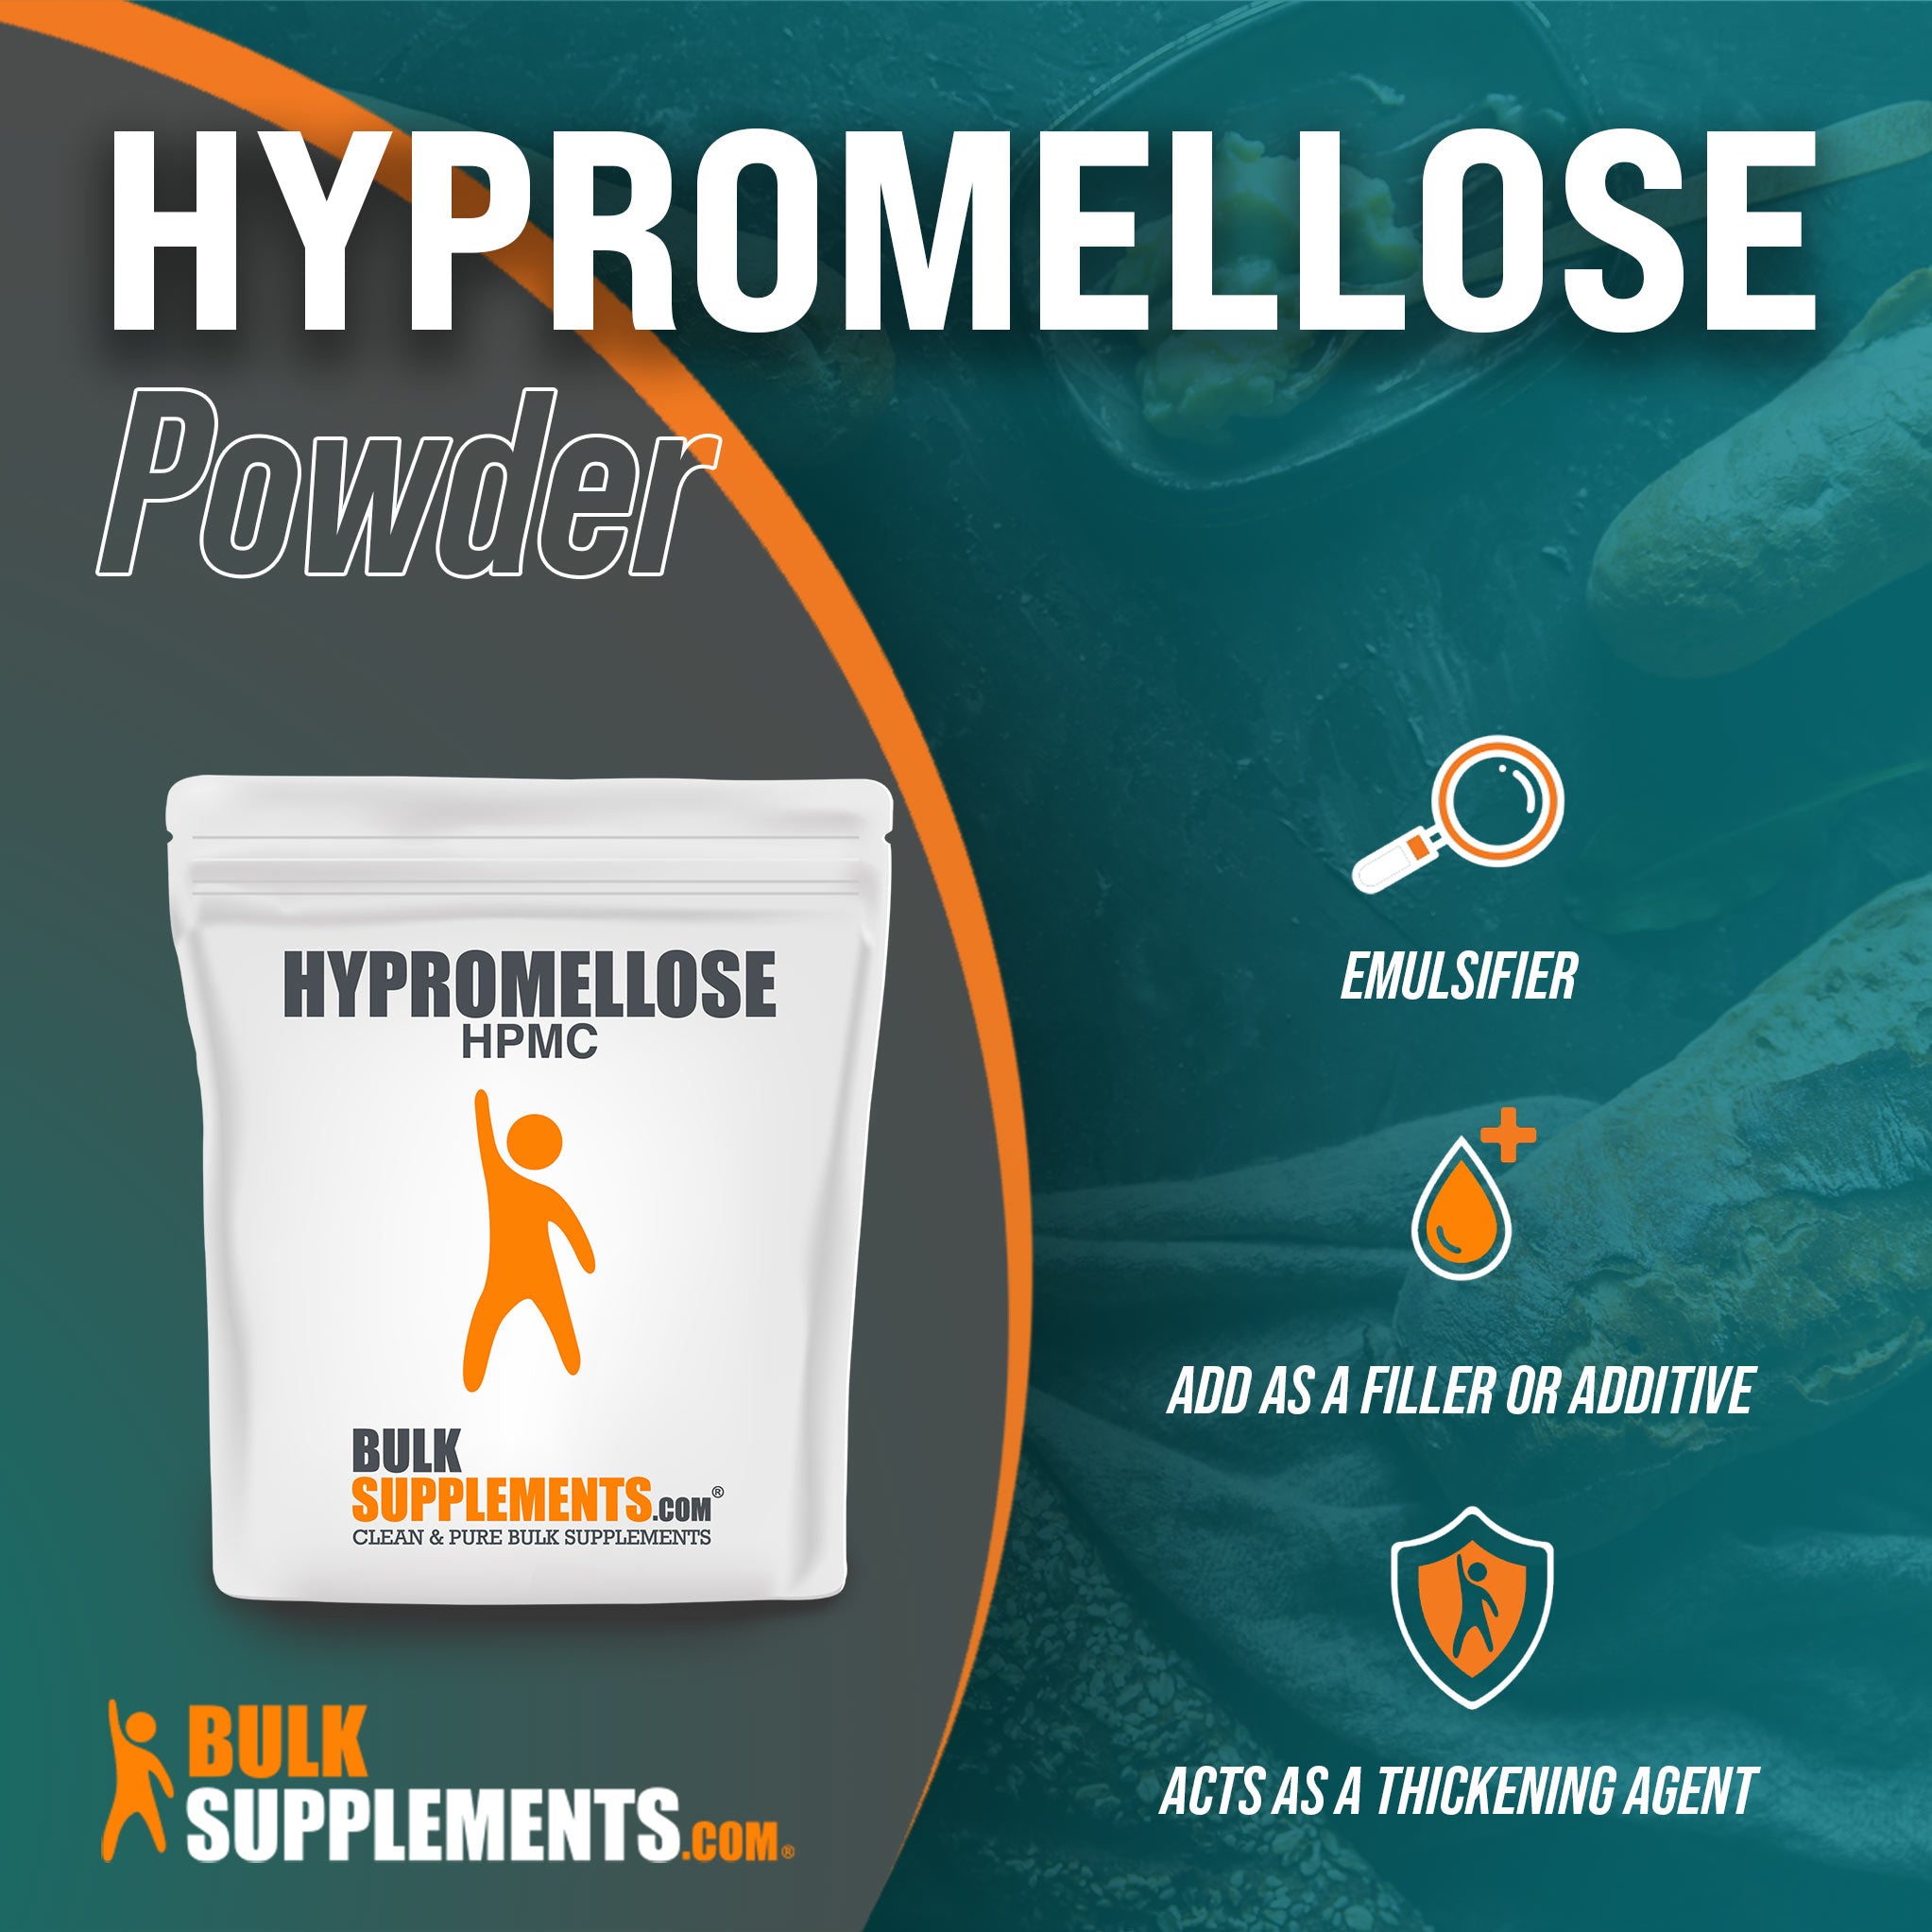 Benefits of Hypromellose Powder; emulsifier, add as a filler or additive, acts as a thickening agent